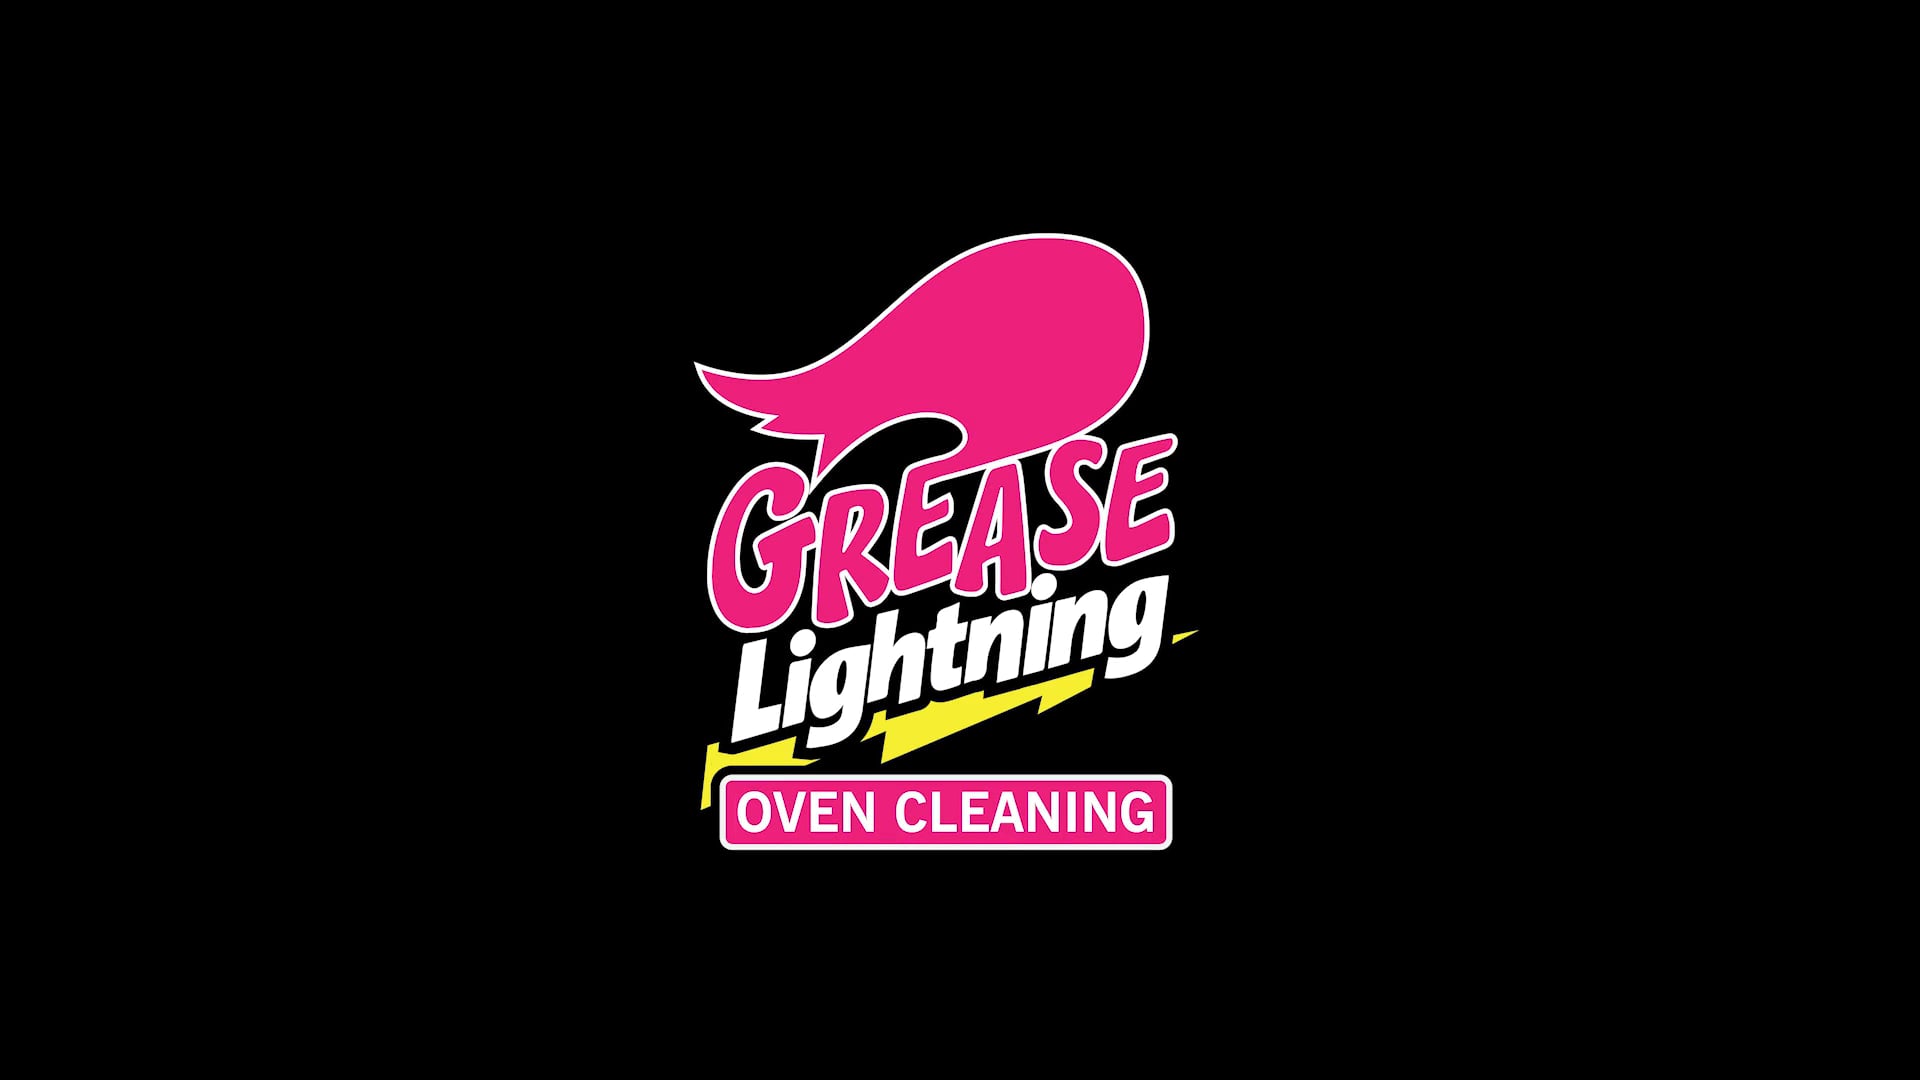 Grease Lightning Oven Cleaning Promo